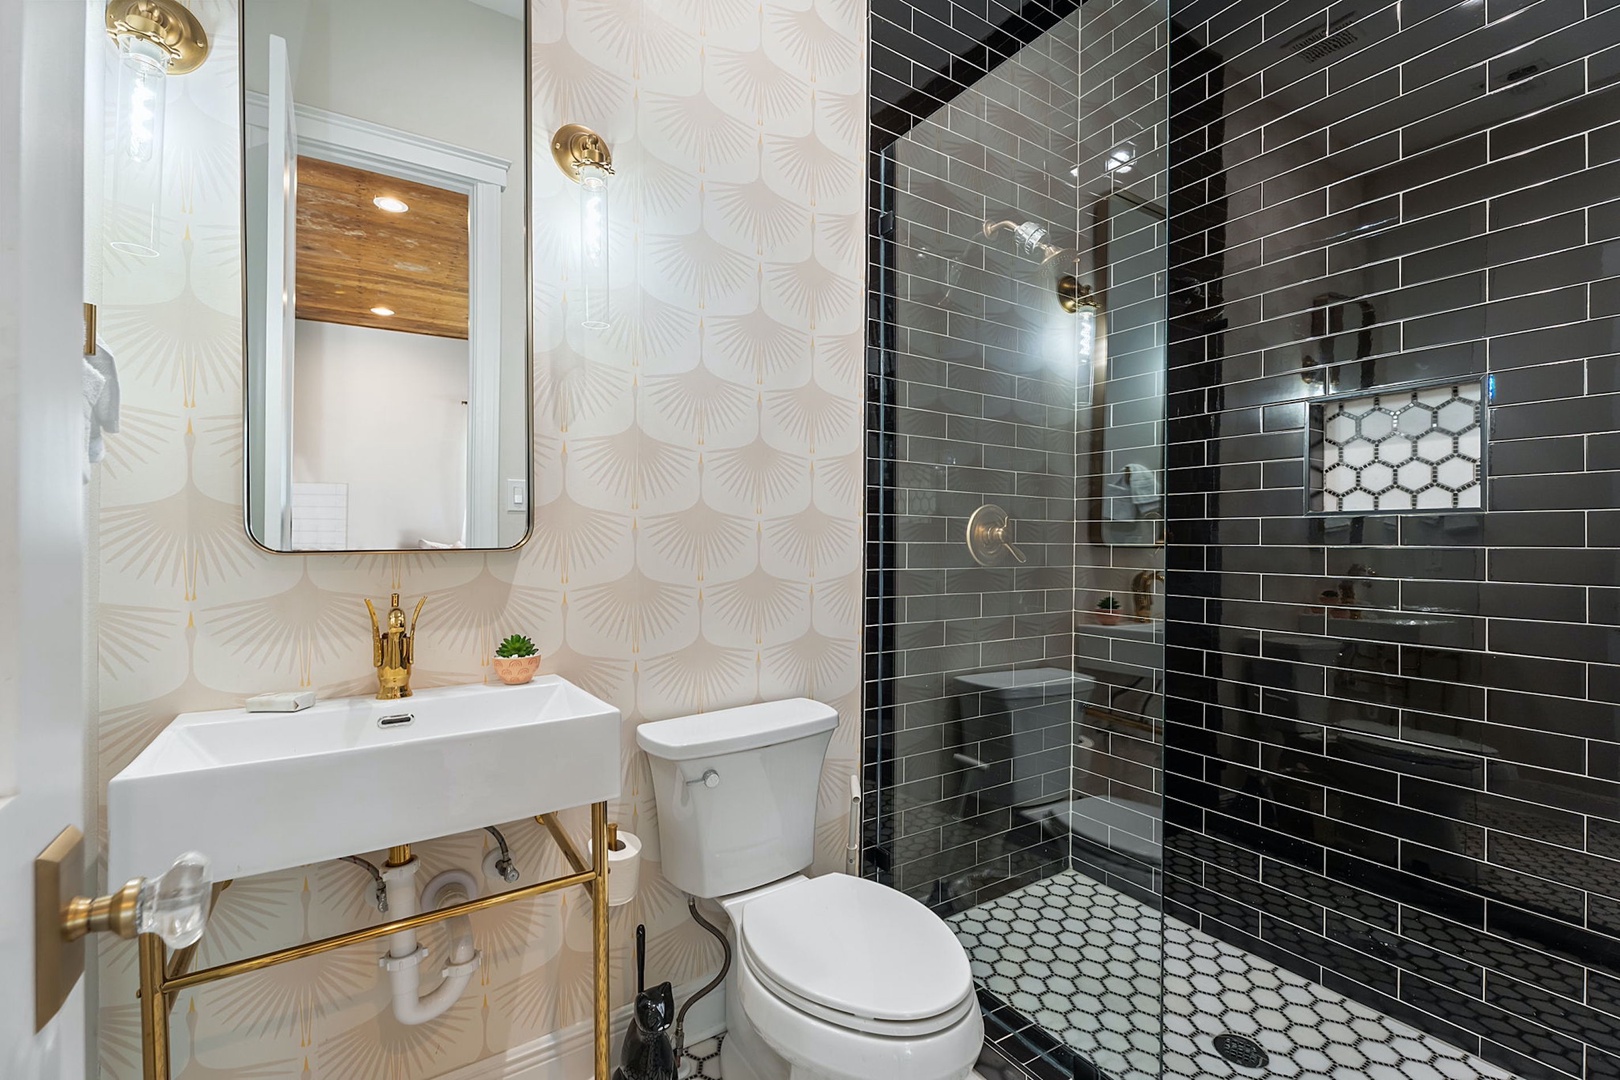 This full bathroom contains a pedestal sink & glass walk-in shower